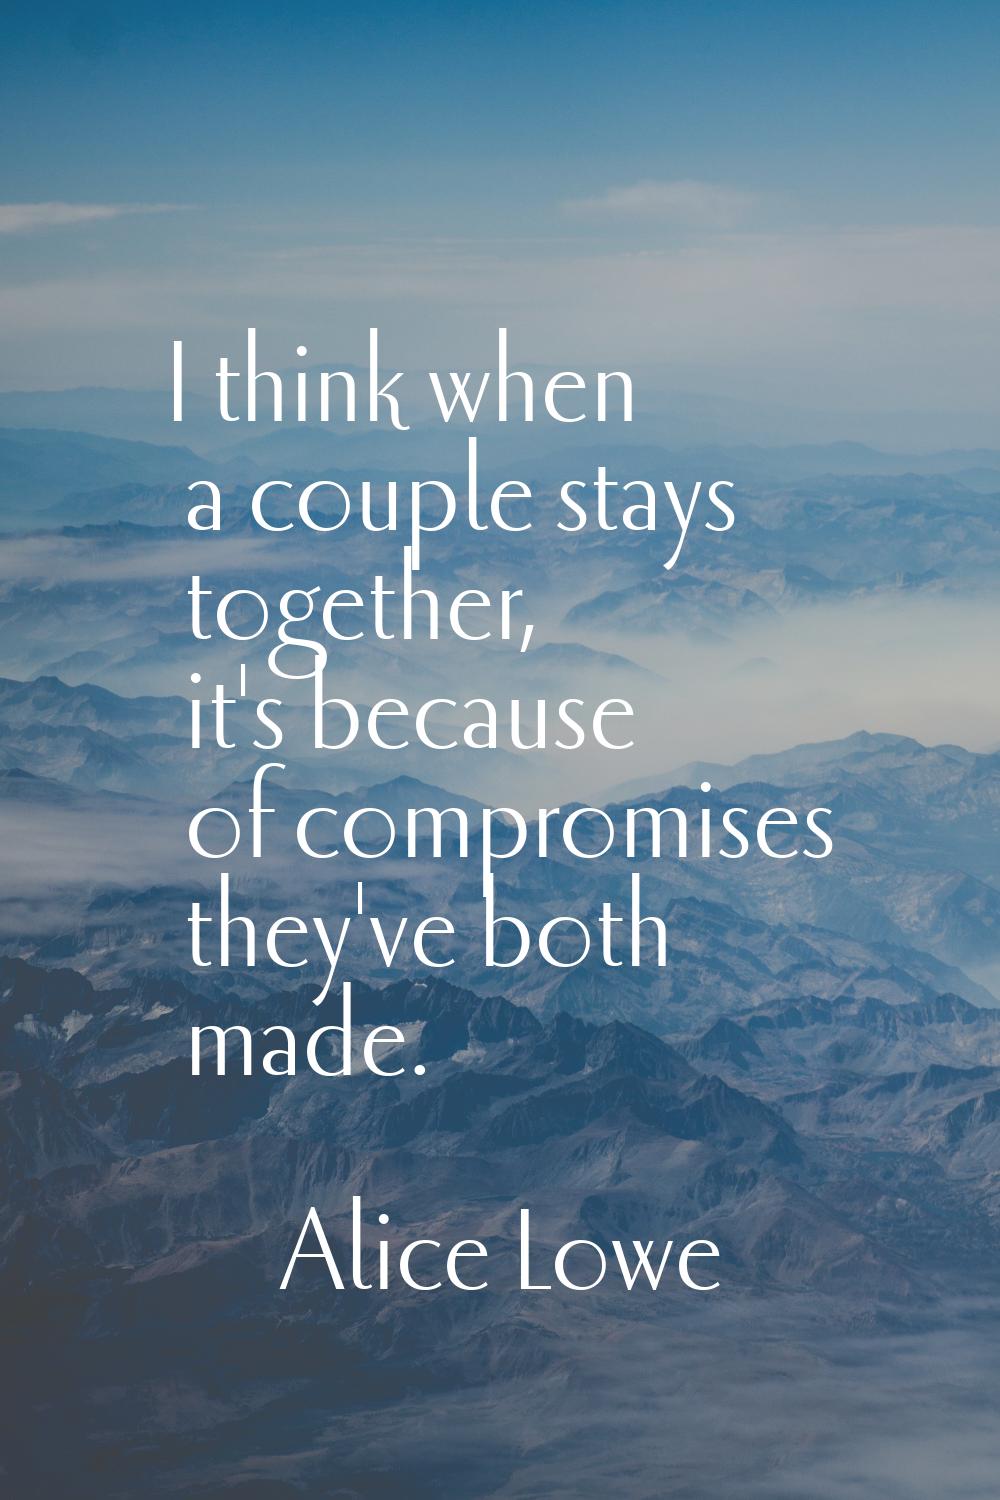 I think when a couple stays together, it's because of compromises they've both made.